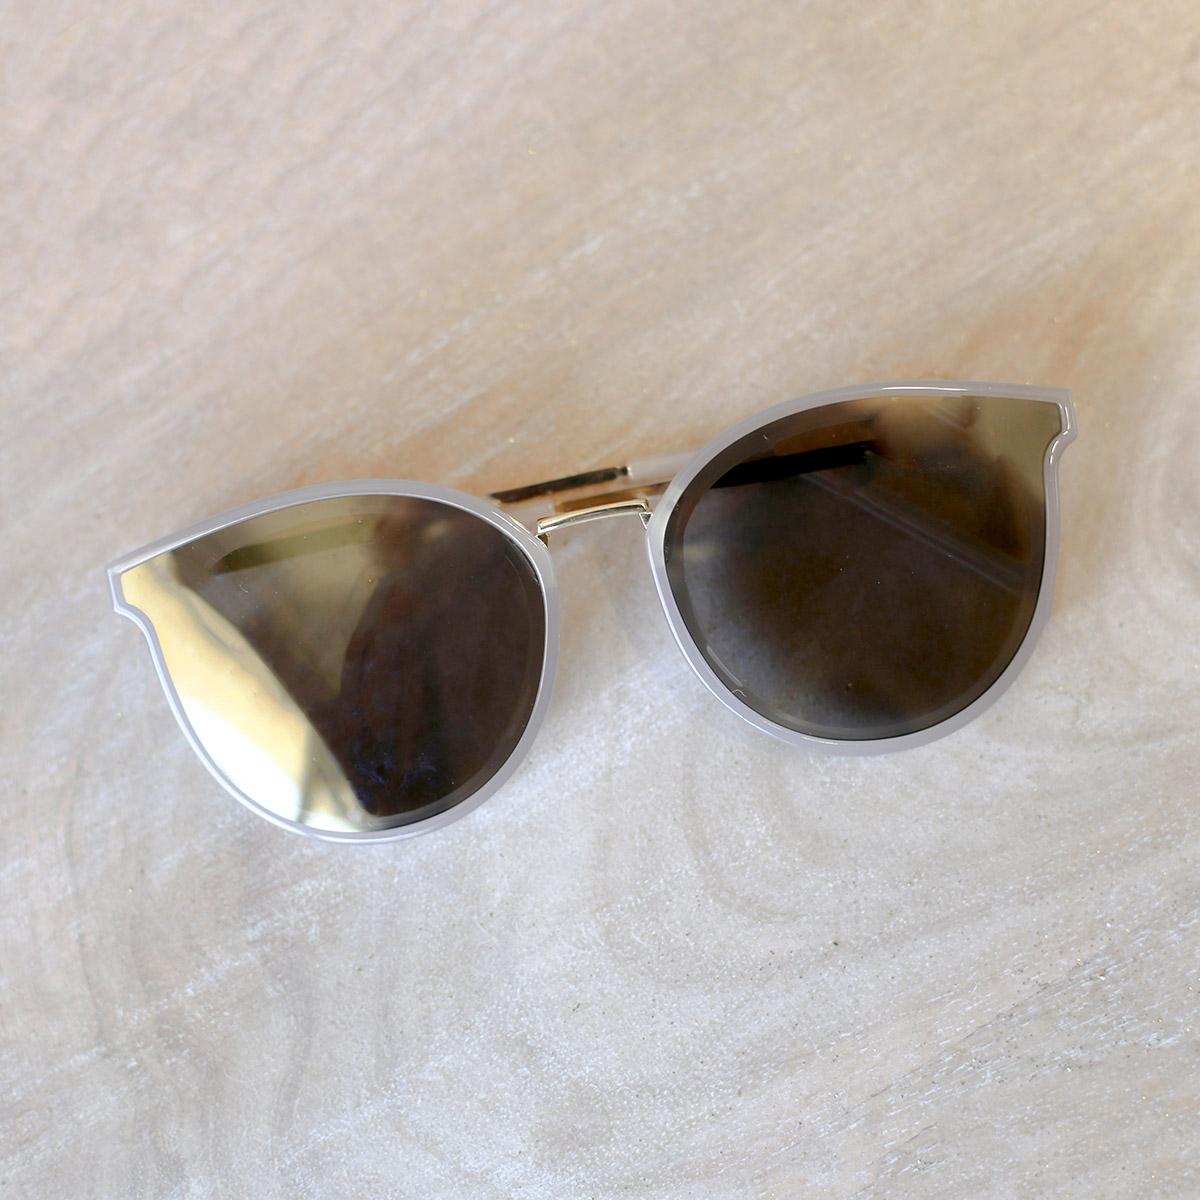 The Canaveral Sunglasses